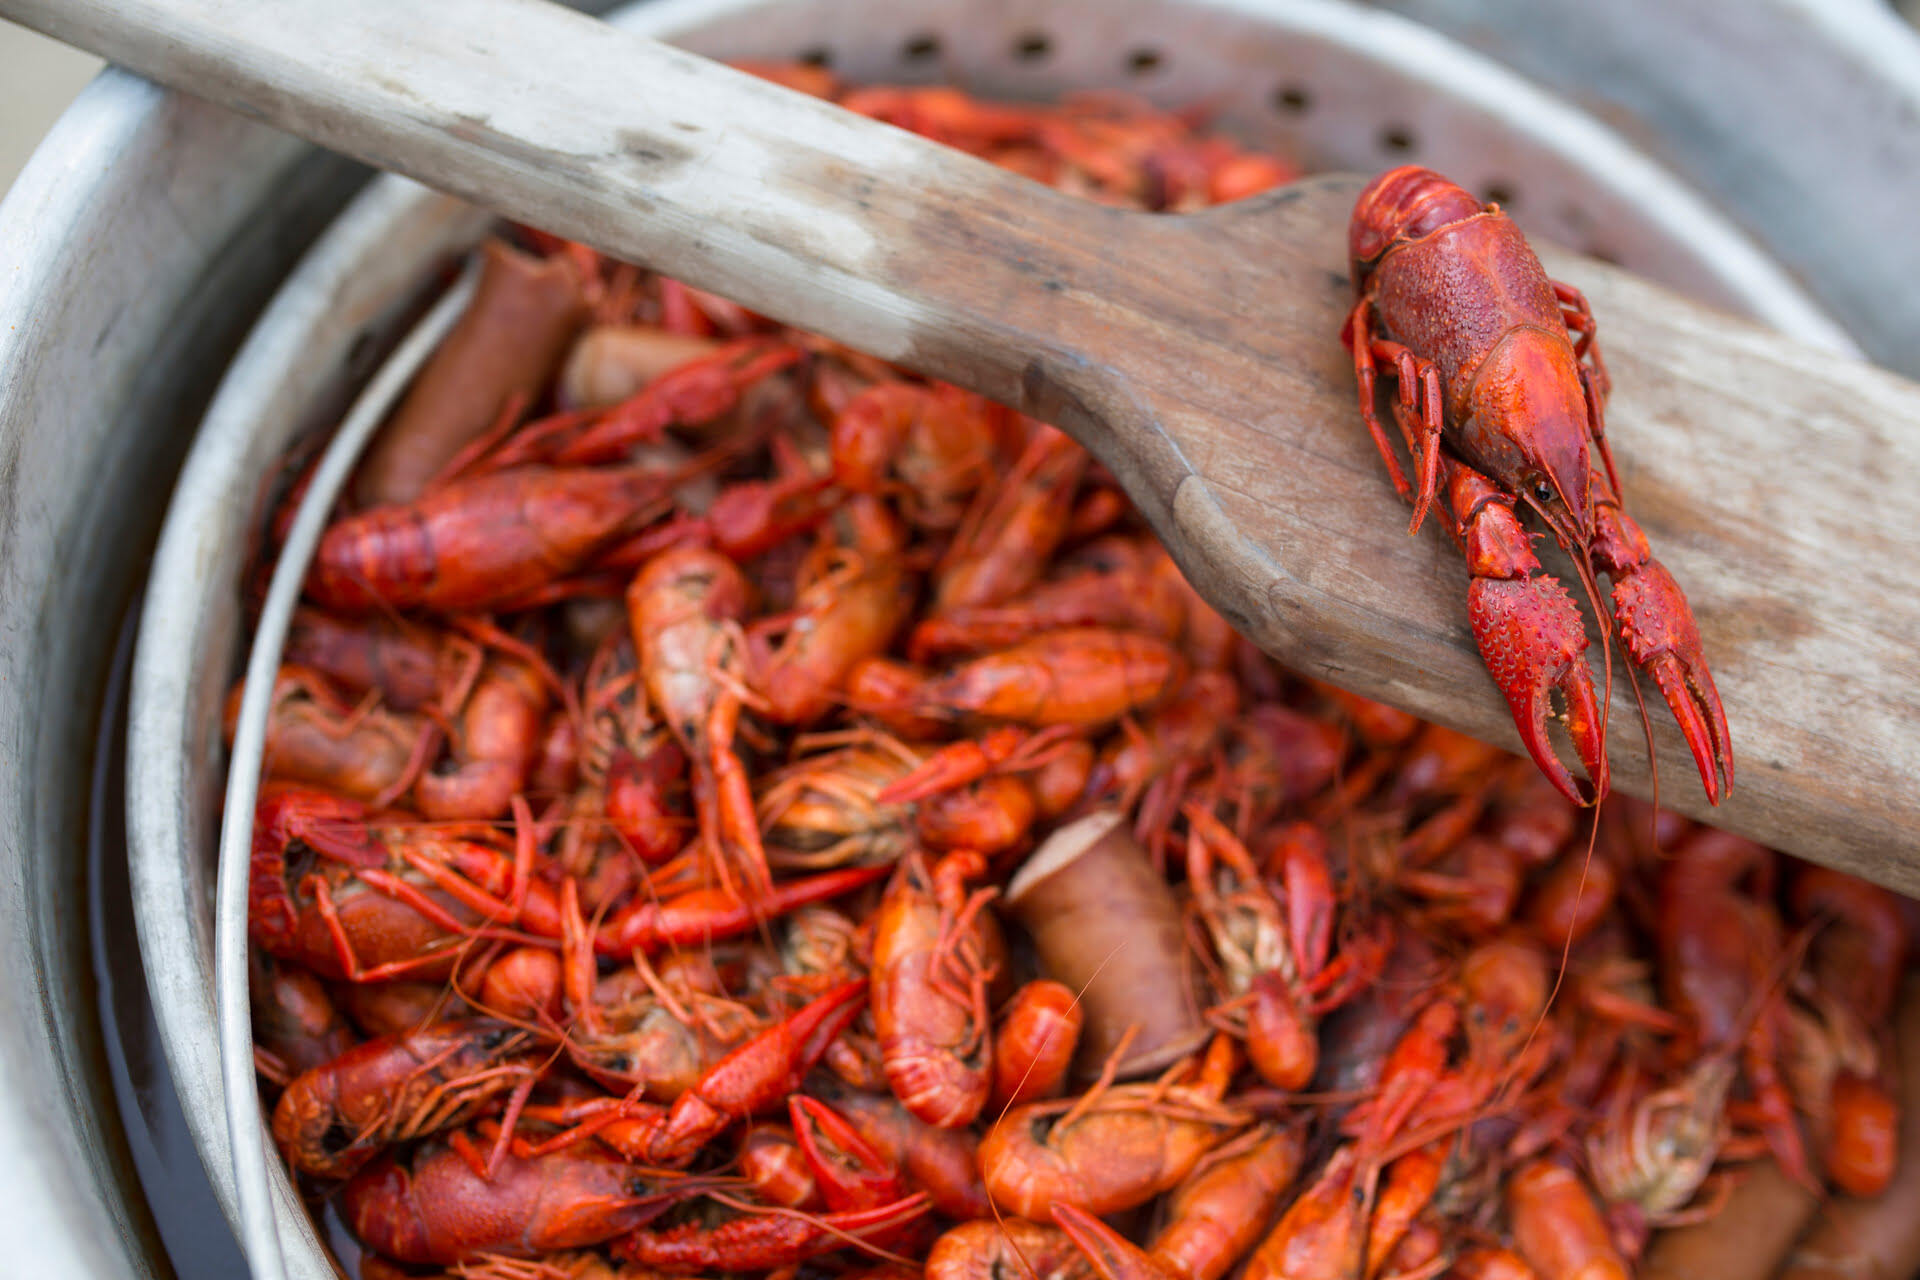 How To Store Cooked Crawfish